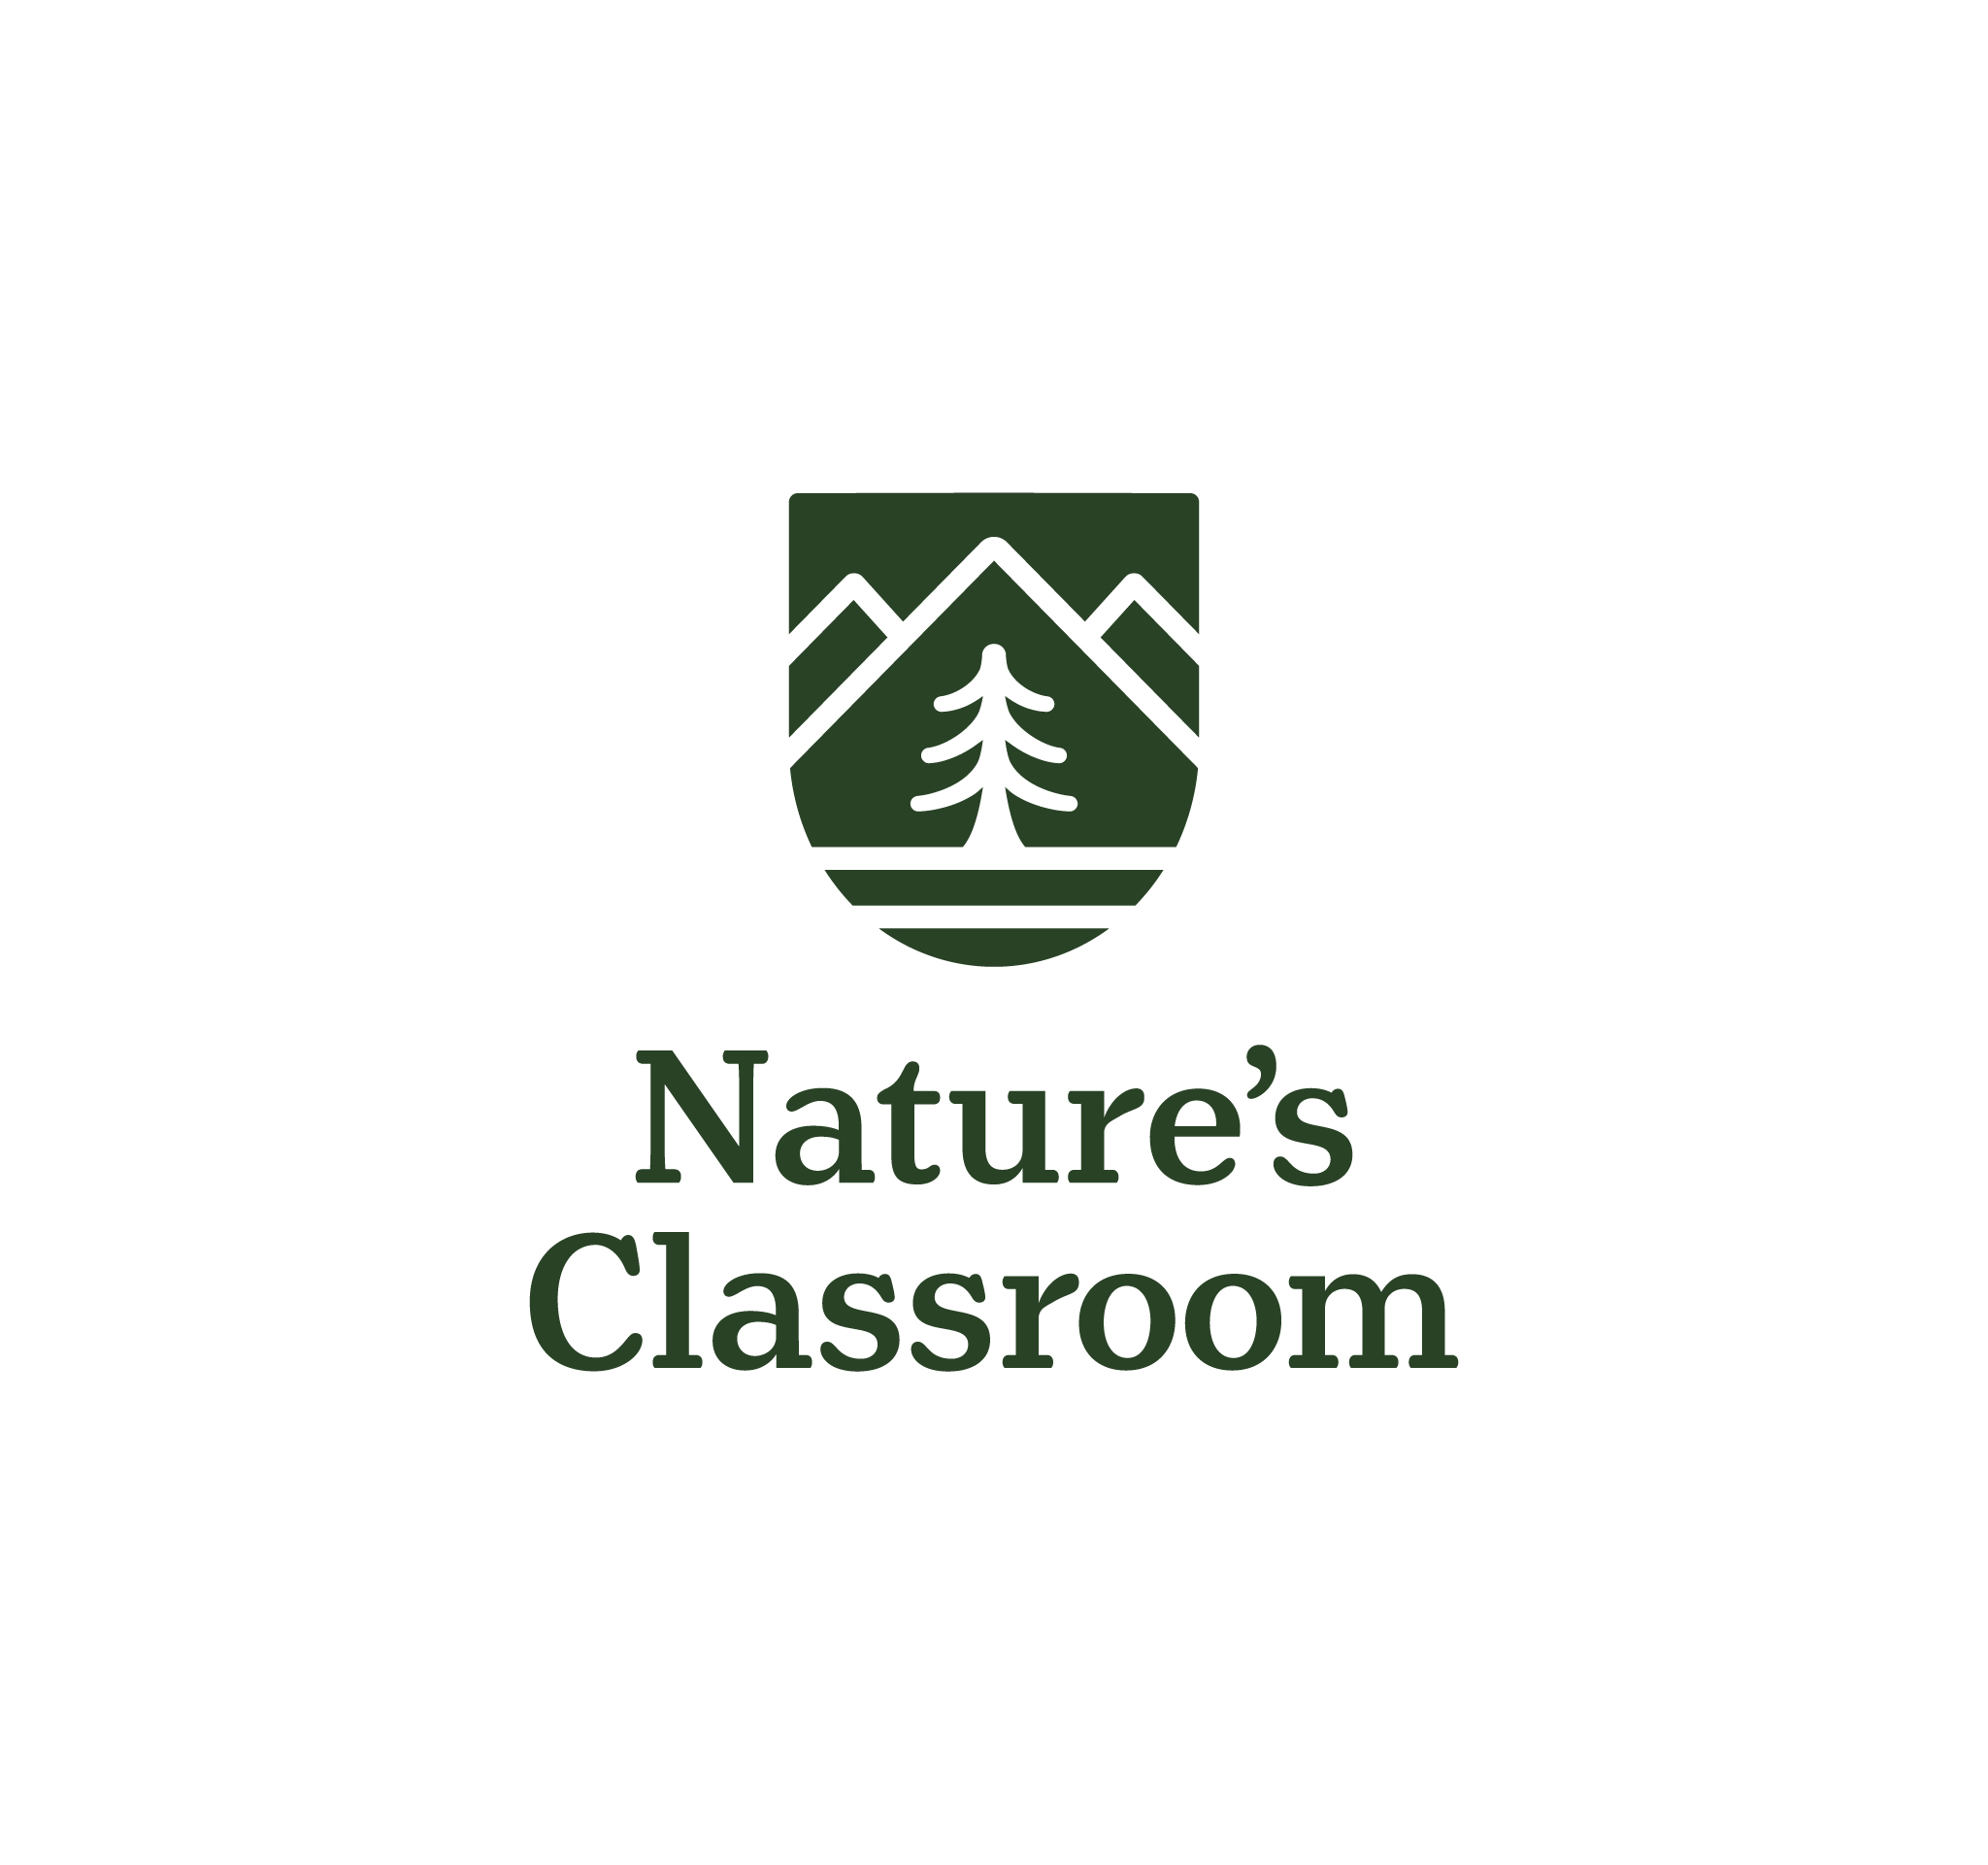 Outdoor Education Instructor – locations in ME, NH, MA, and CT